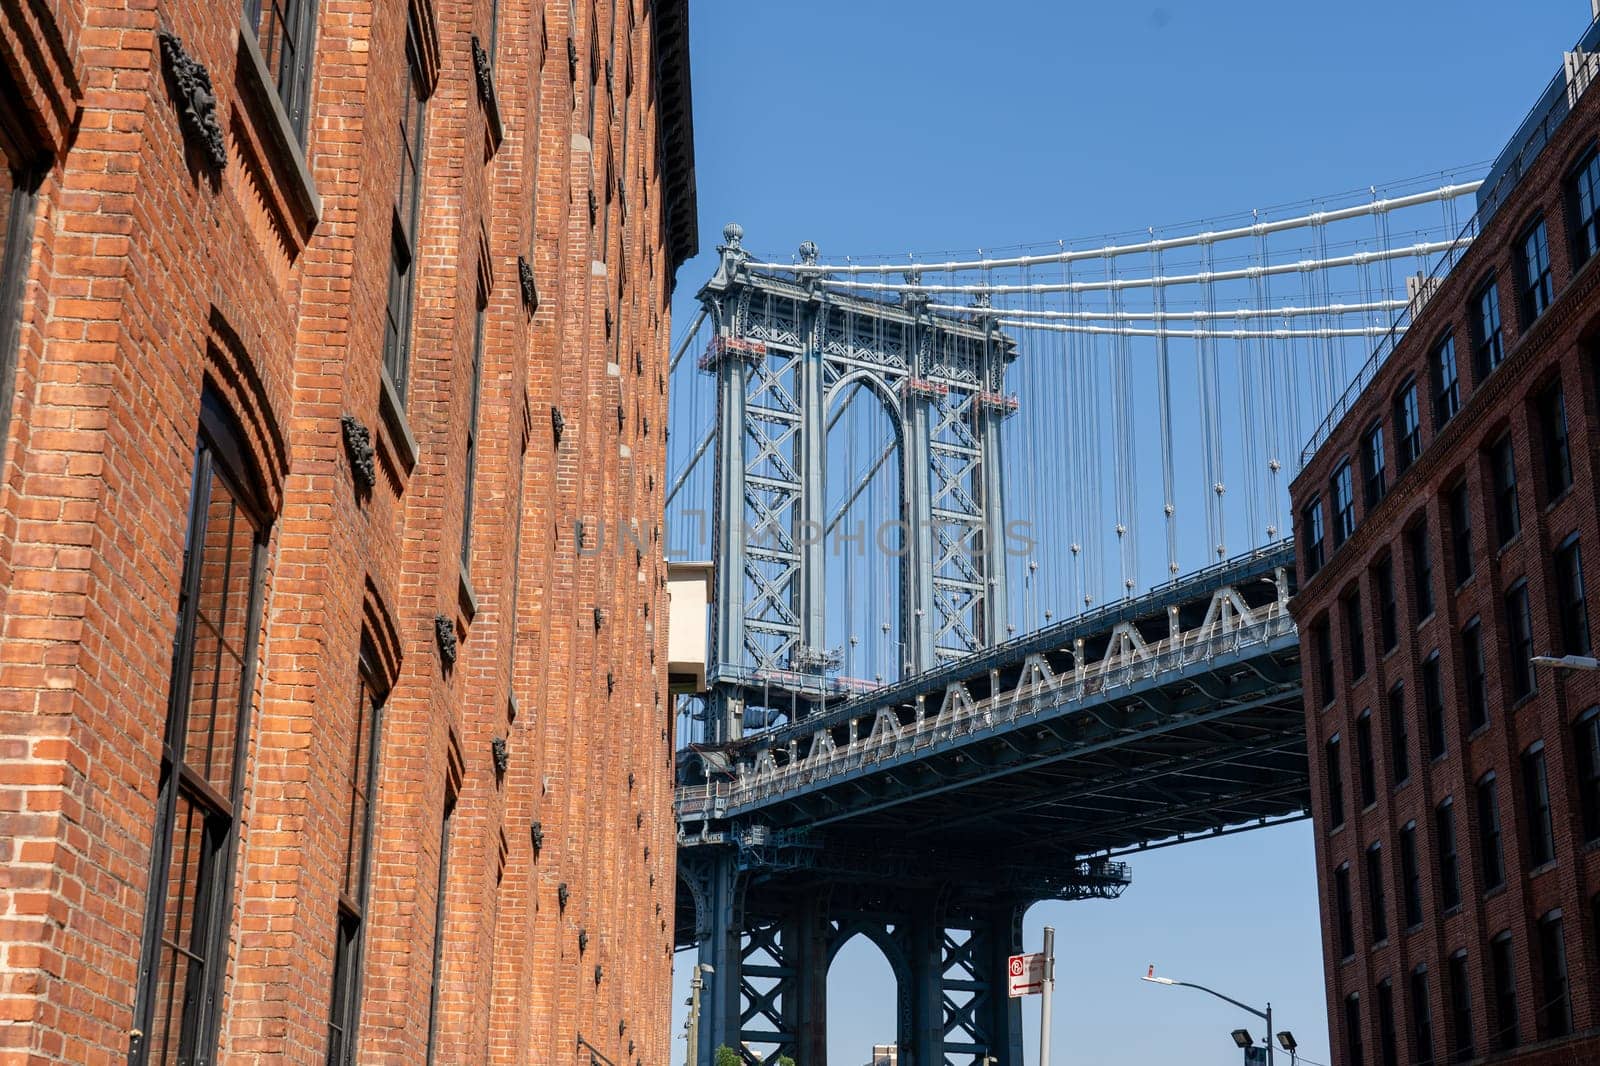 New York, United States of America - September 22, 2019: Pillar of Manhattan Bridge as seen from an alley in Dumbo district in Brooklyn.